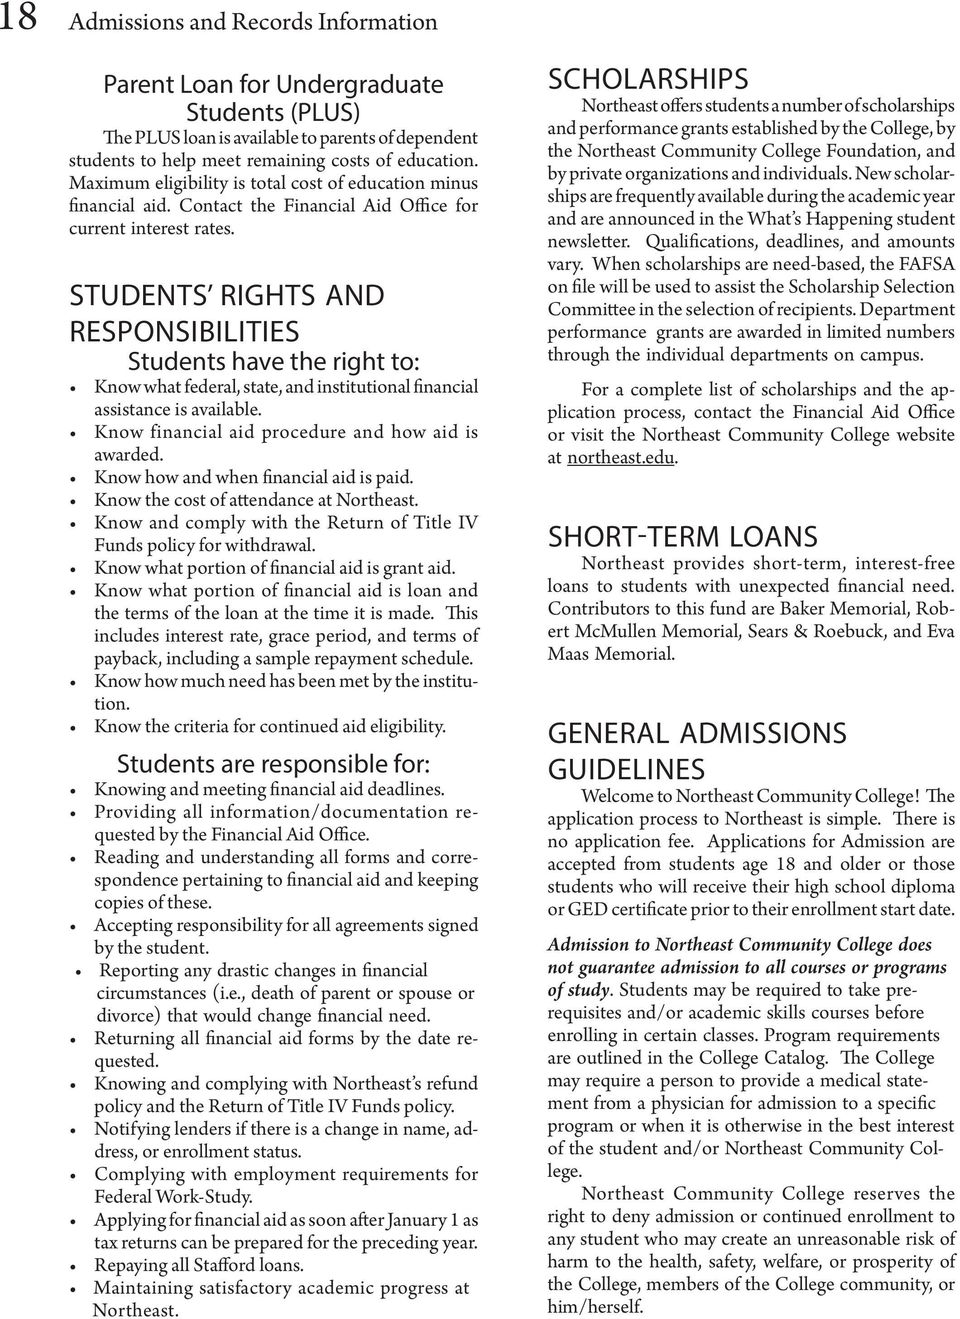 STUDENTS RIGHTS AND RESPONSIBILITIES Students have the right to: Know what federal, state, and institutional financial assistance is available. Know financial aid procedure and how aid is awarded.